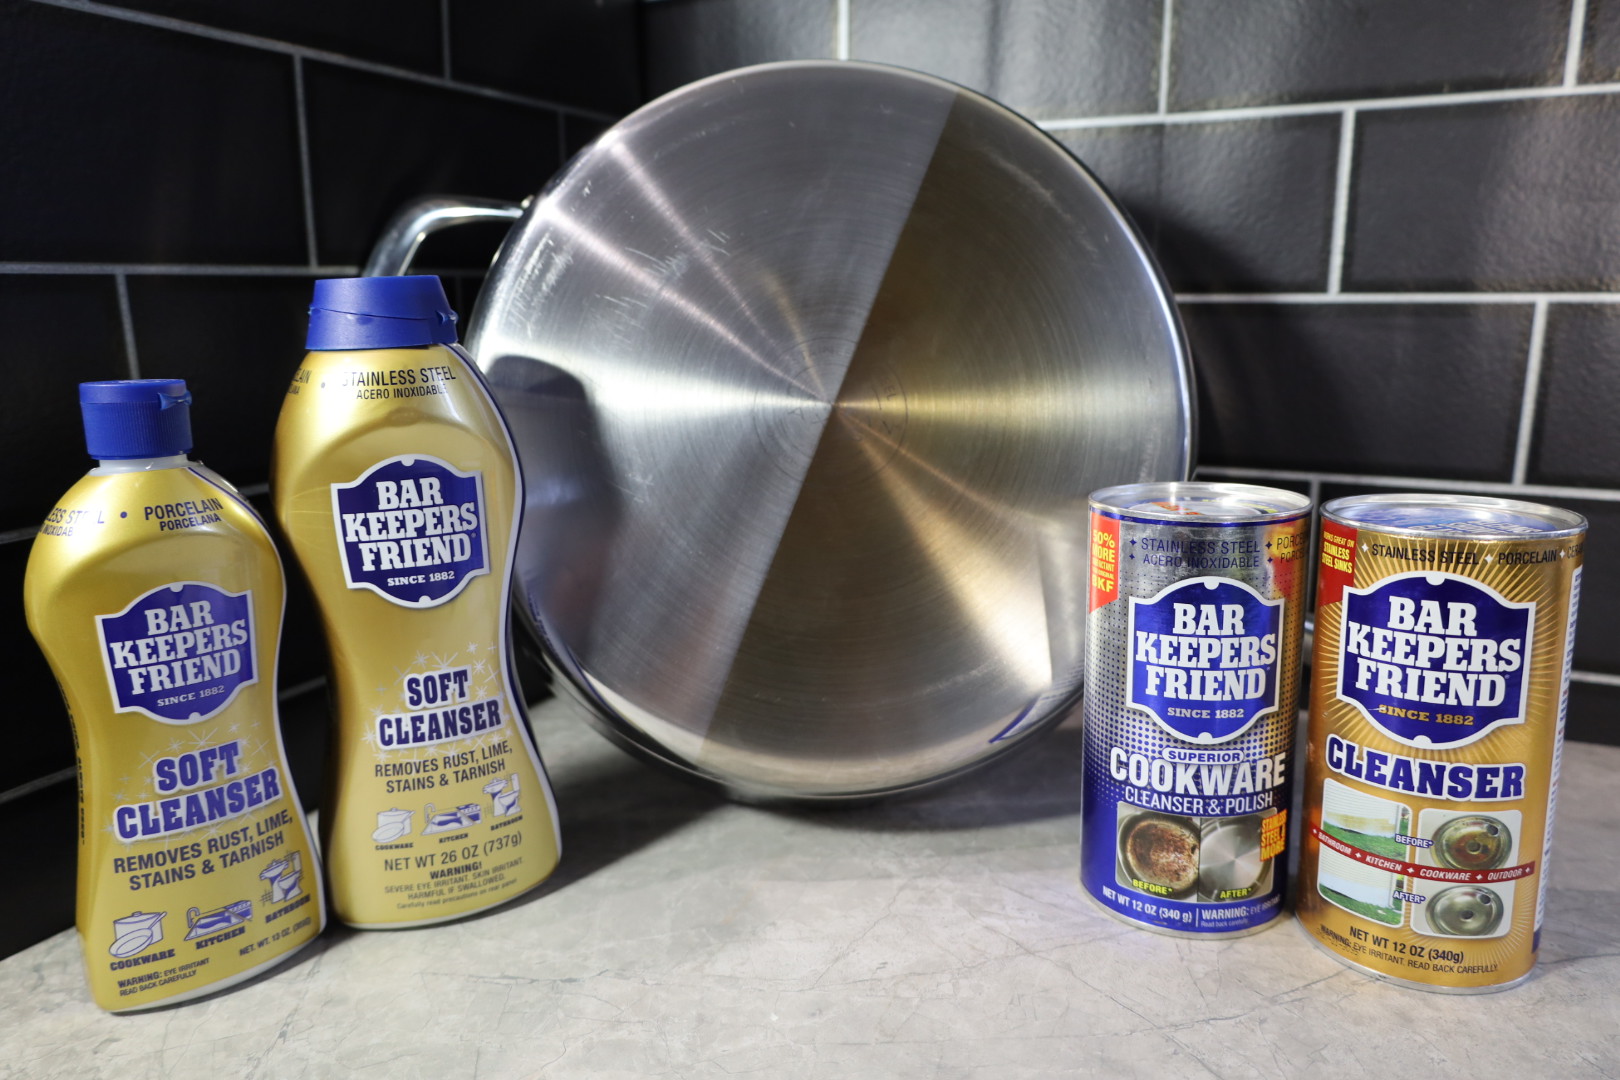 Bar Keepers Friend Cookware Cleanser & Polish 340g Can Product Image 0